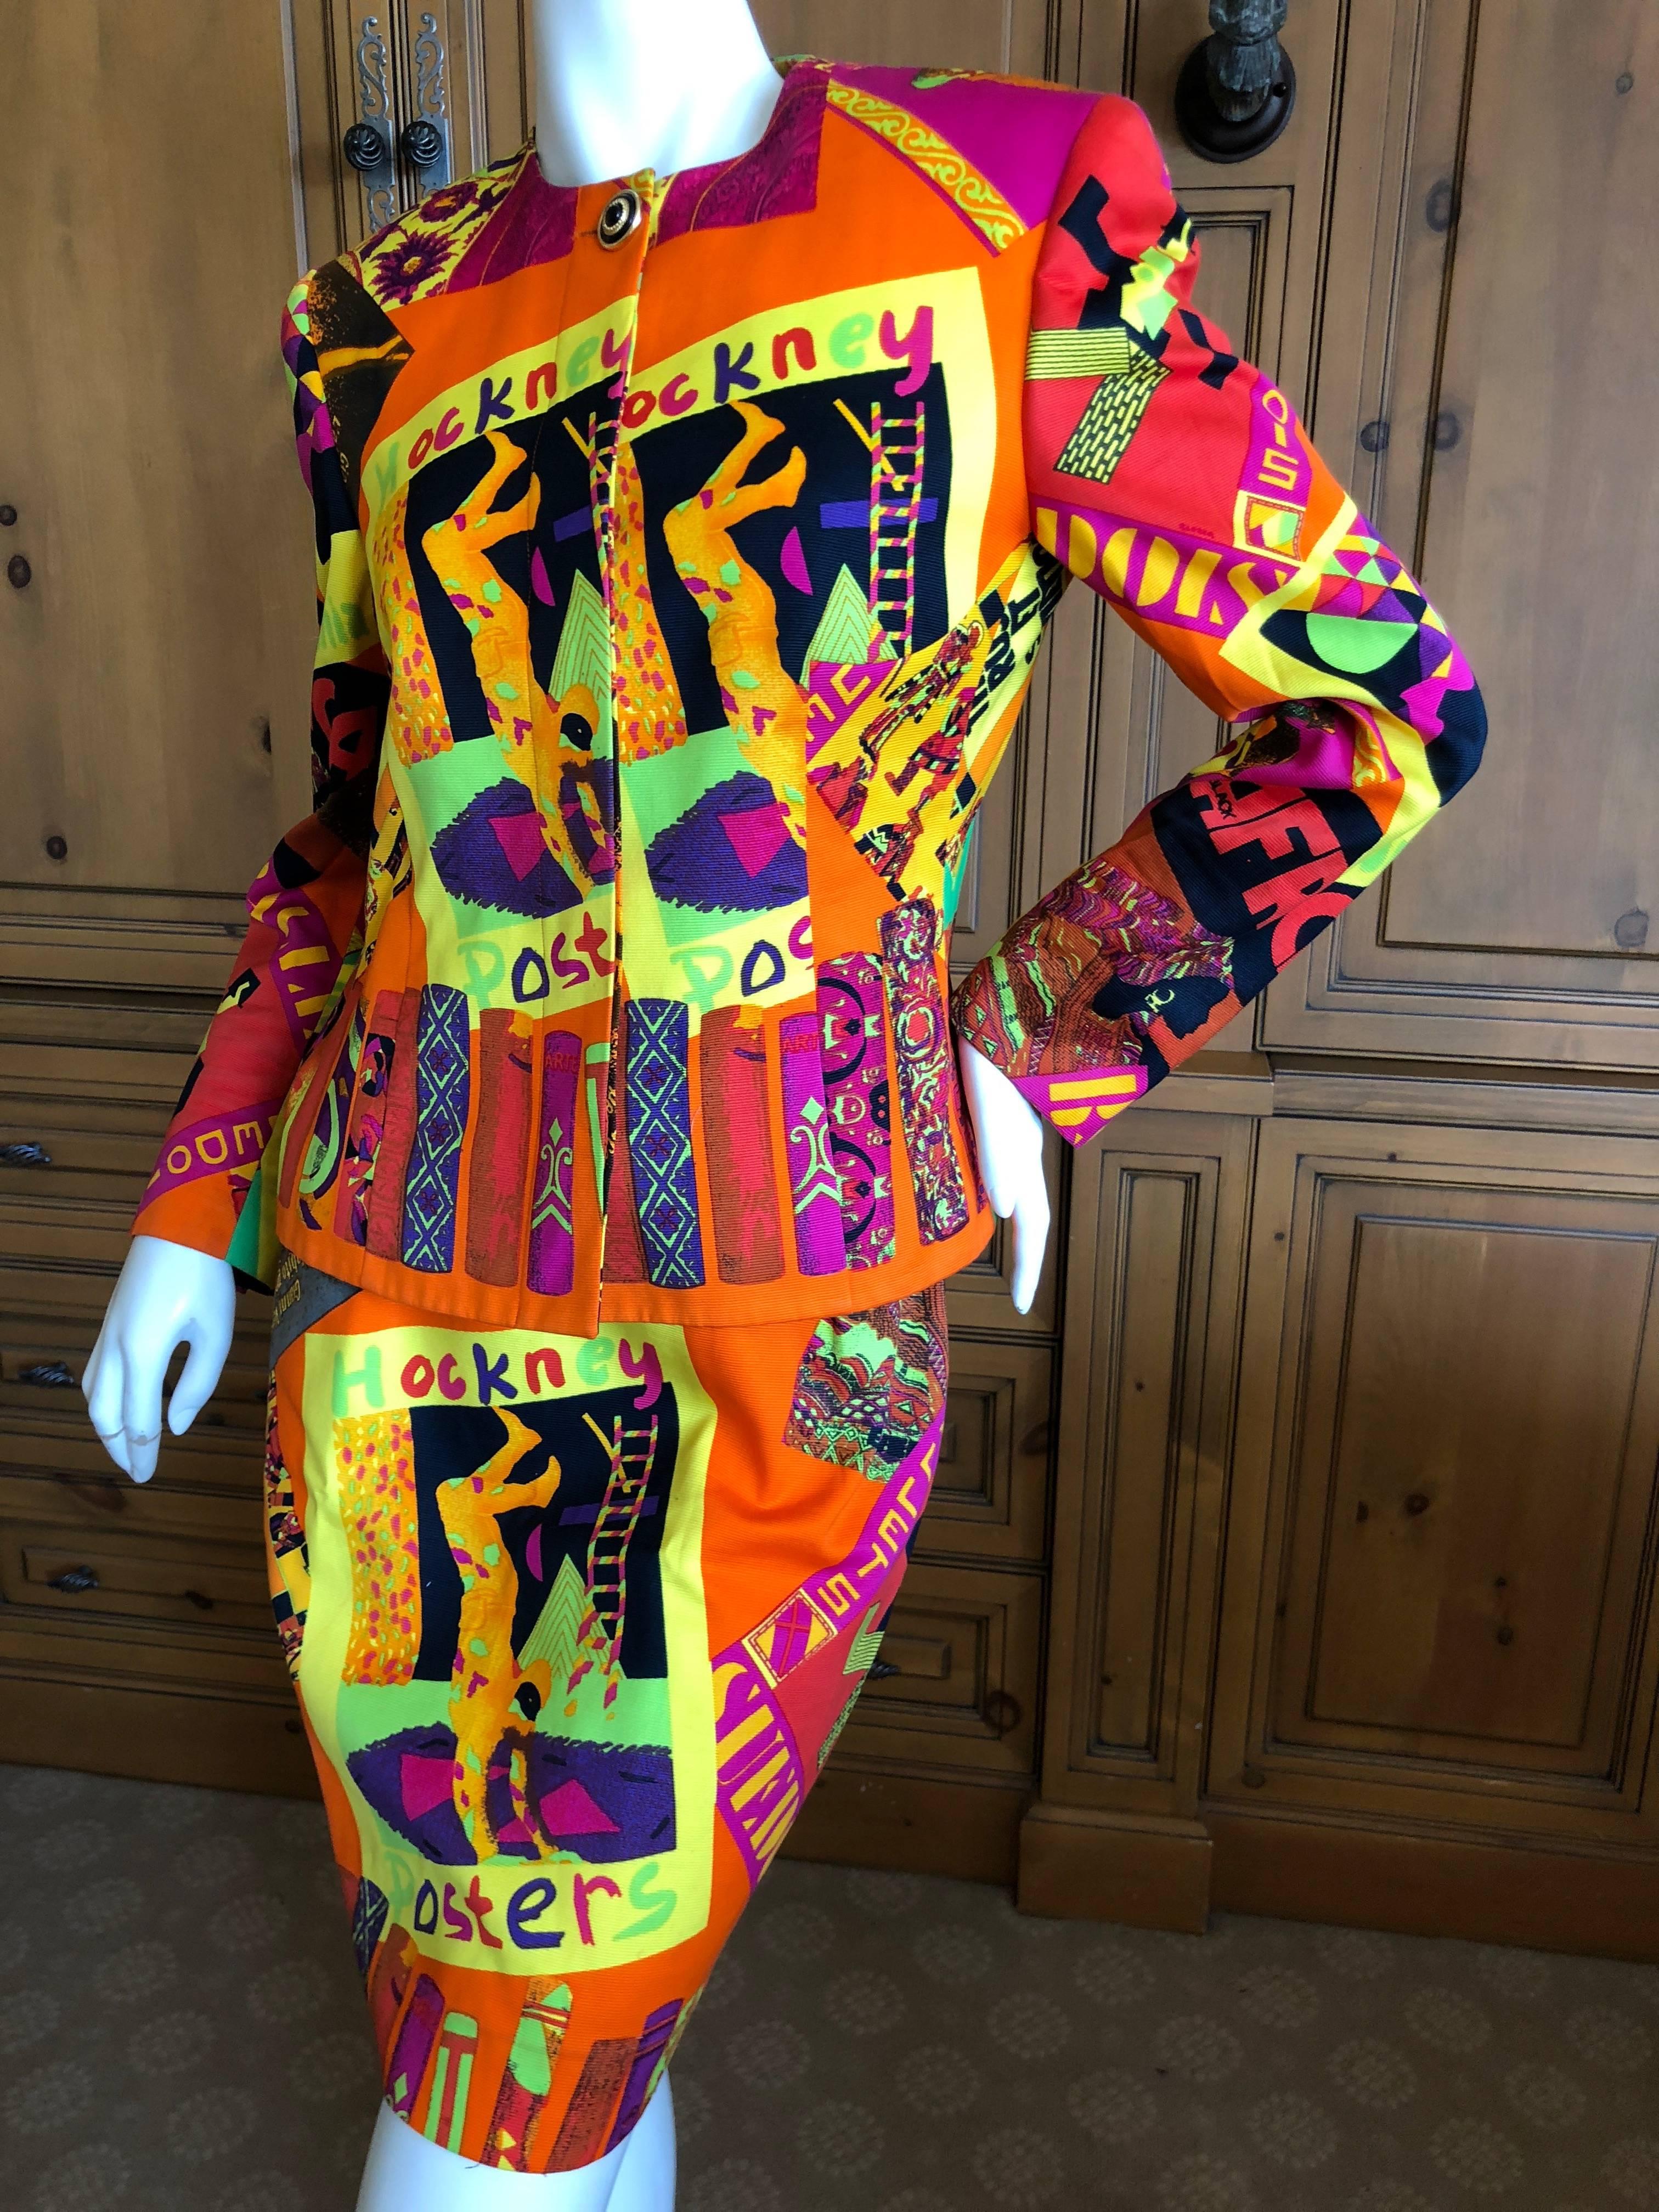 Gianni Versace Instante 1987 David Hockney Poster Russian Ballet Print Cotton Skirt Suit
Size 44.
In Excellent Condition.
Bust 36